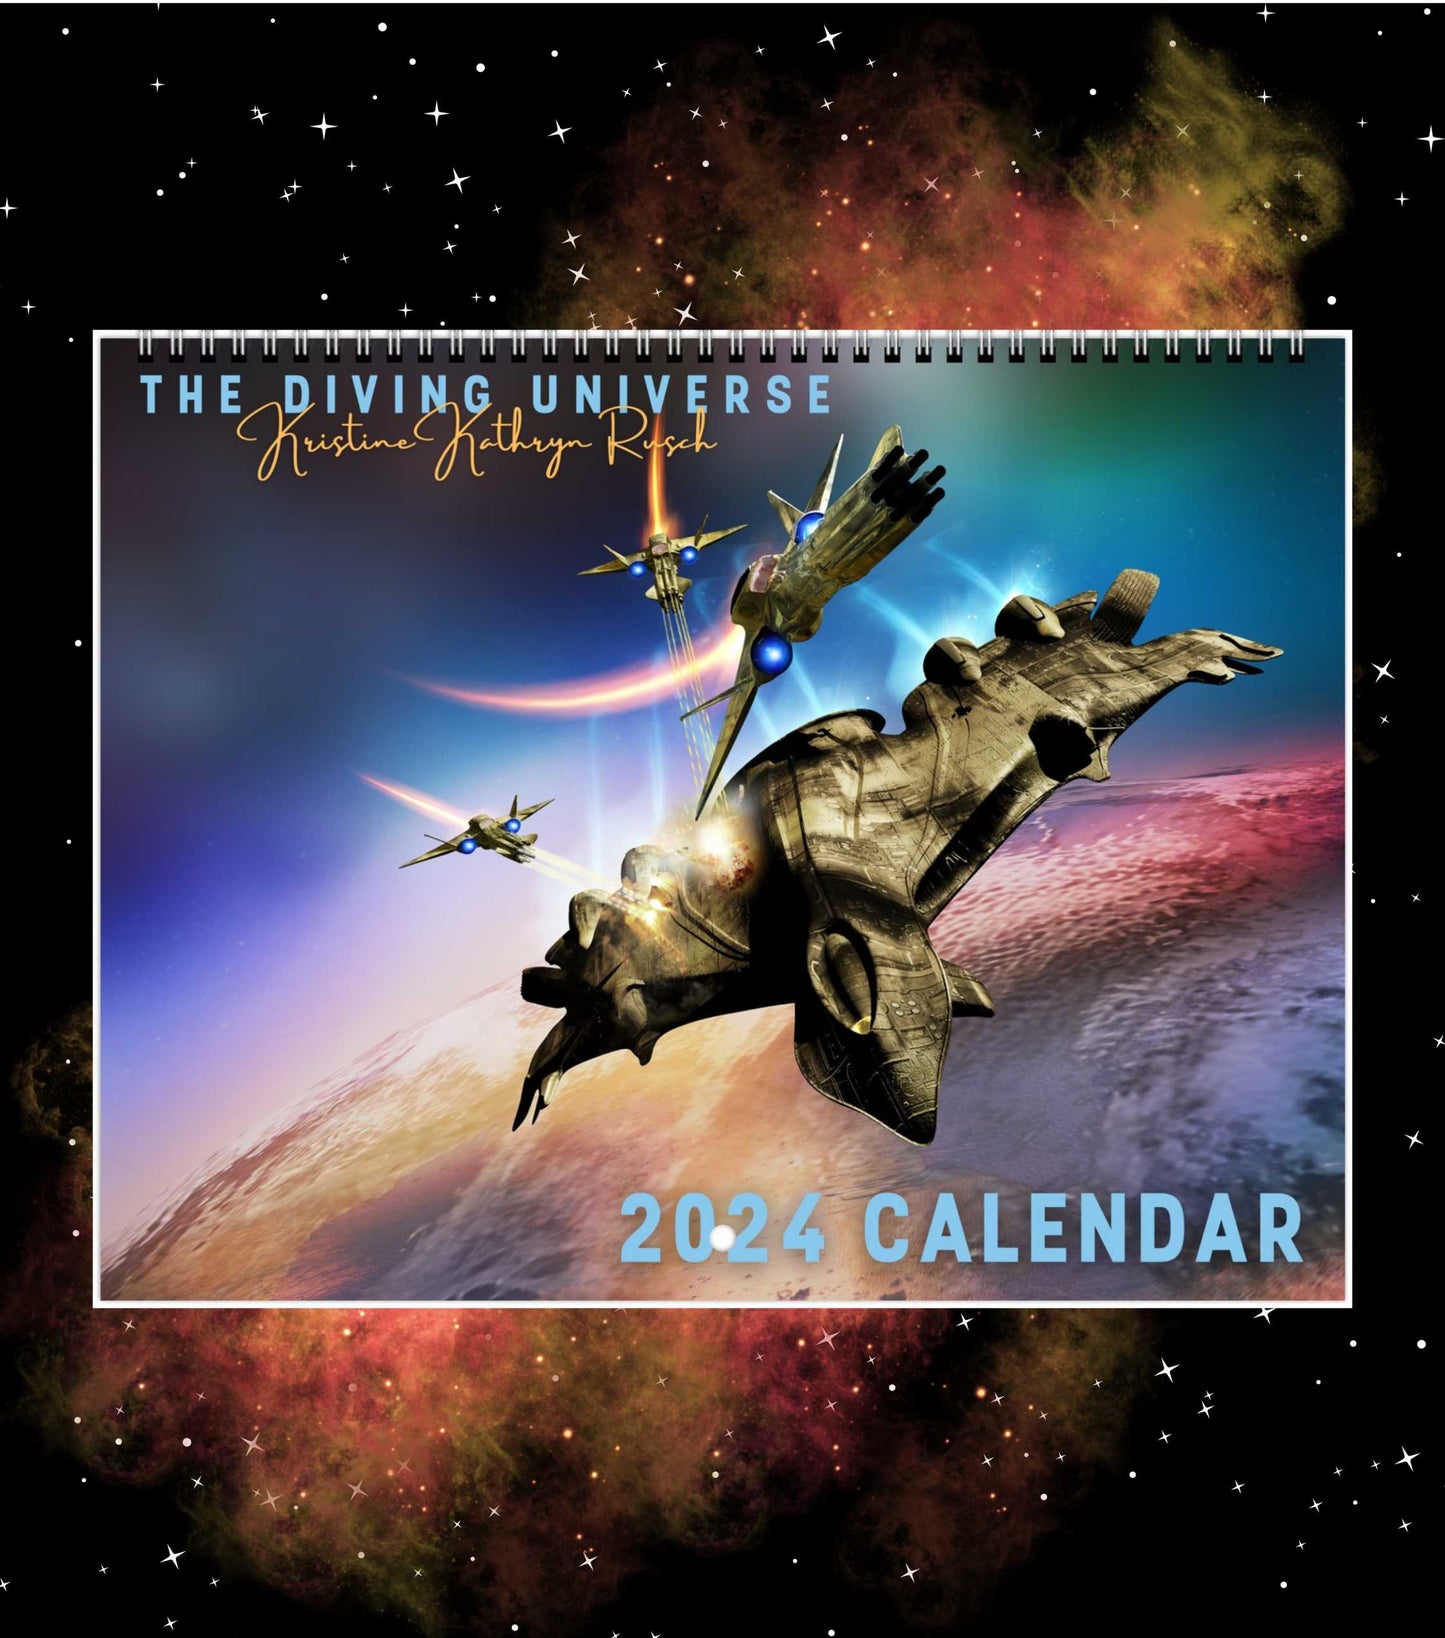 Diving Universe SPACESHIP Art 2024 Hanging Wall Calendar - The Diving Universe by Kristine Kathryn Rusch